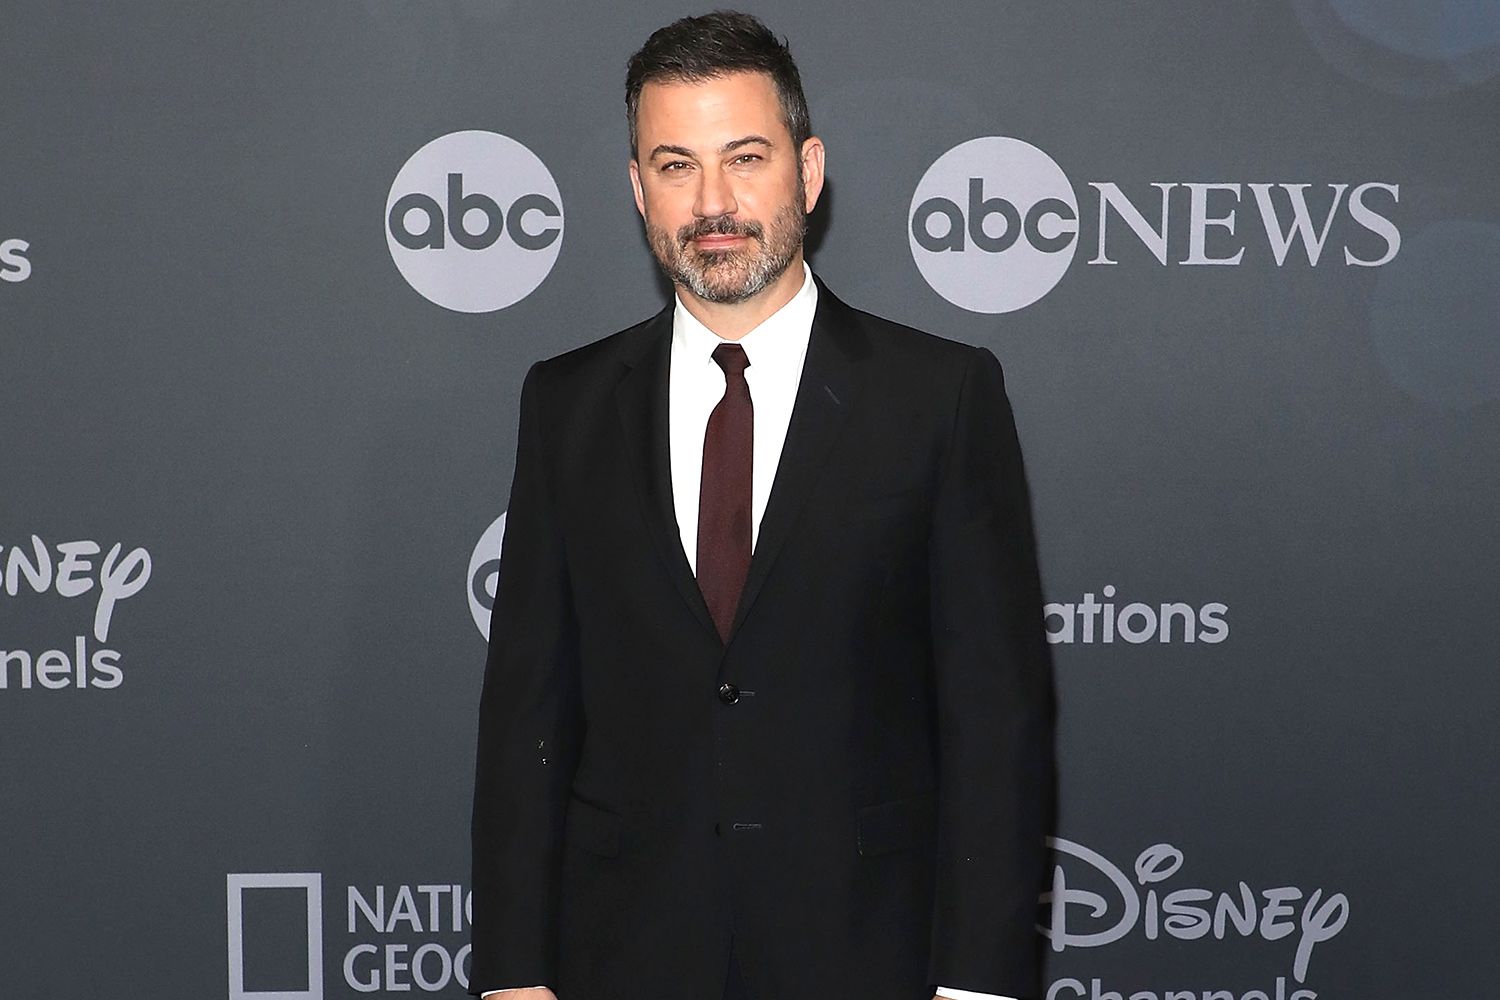 Happy Birthday Jimmy Kimmel: Here's How Much American late-night talk-show personality Net Worth in 2022